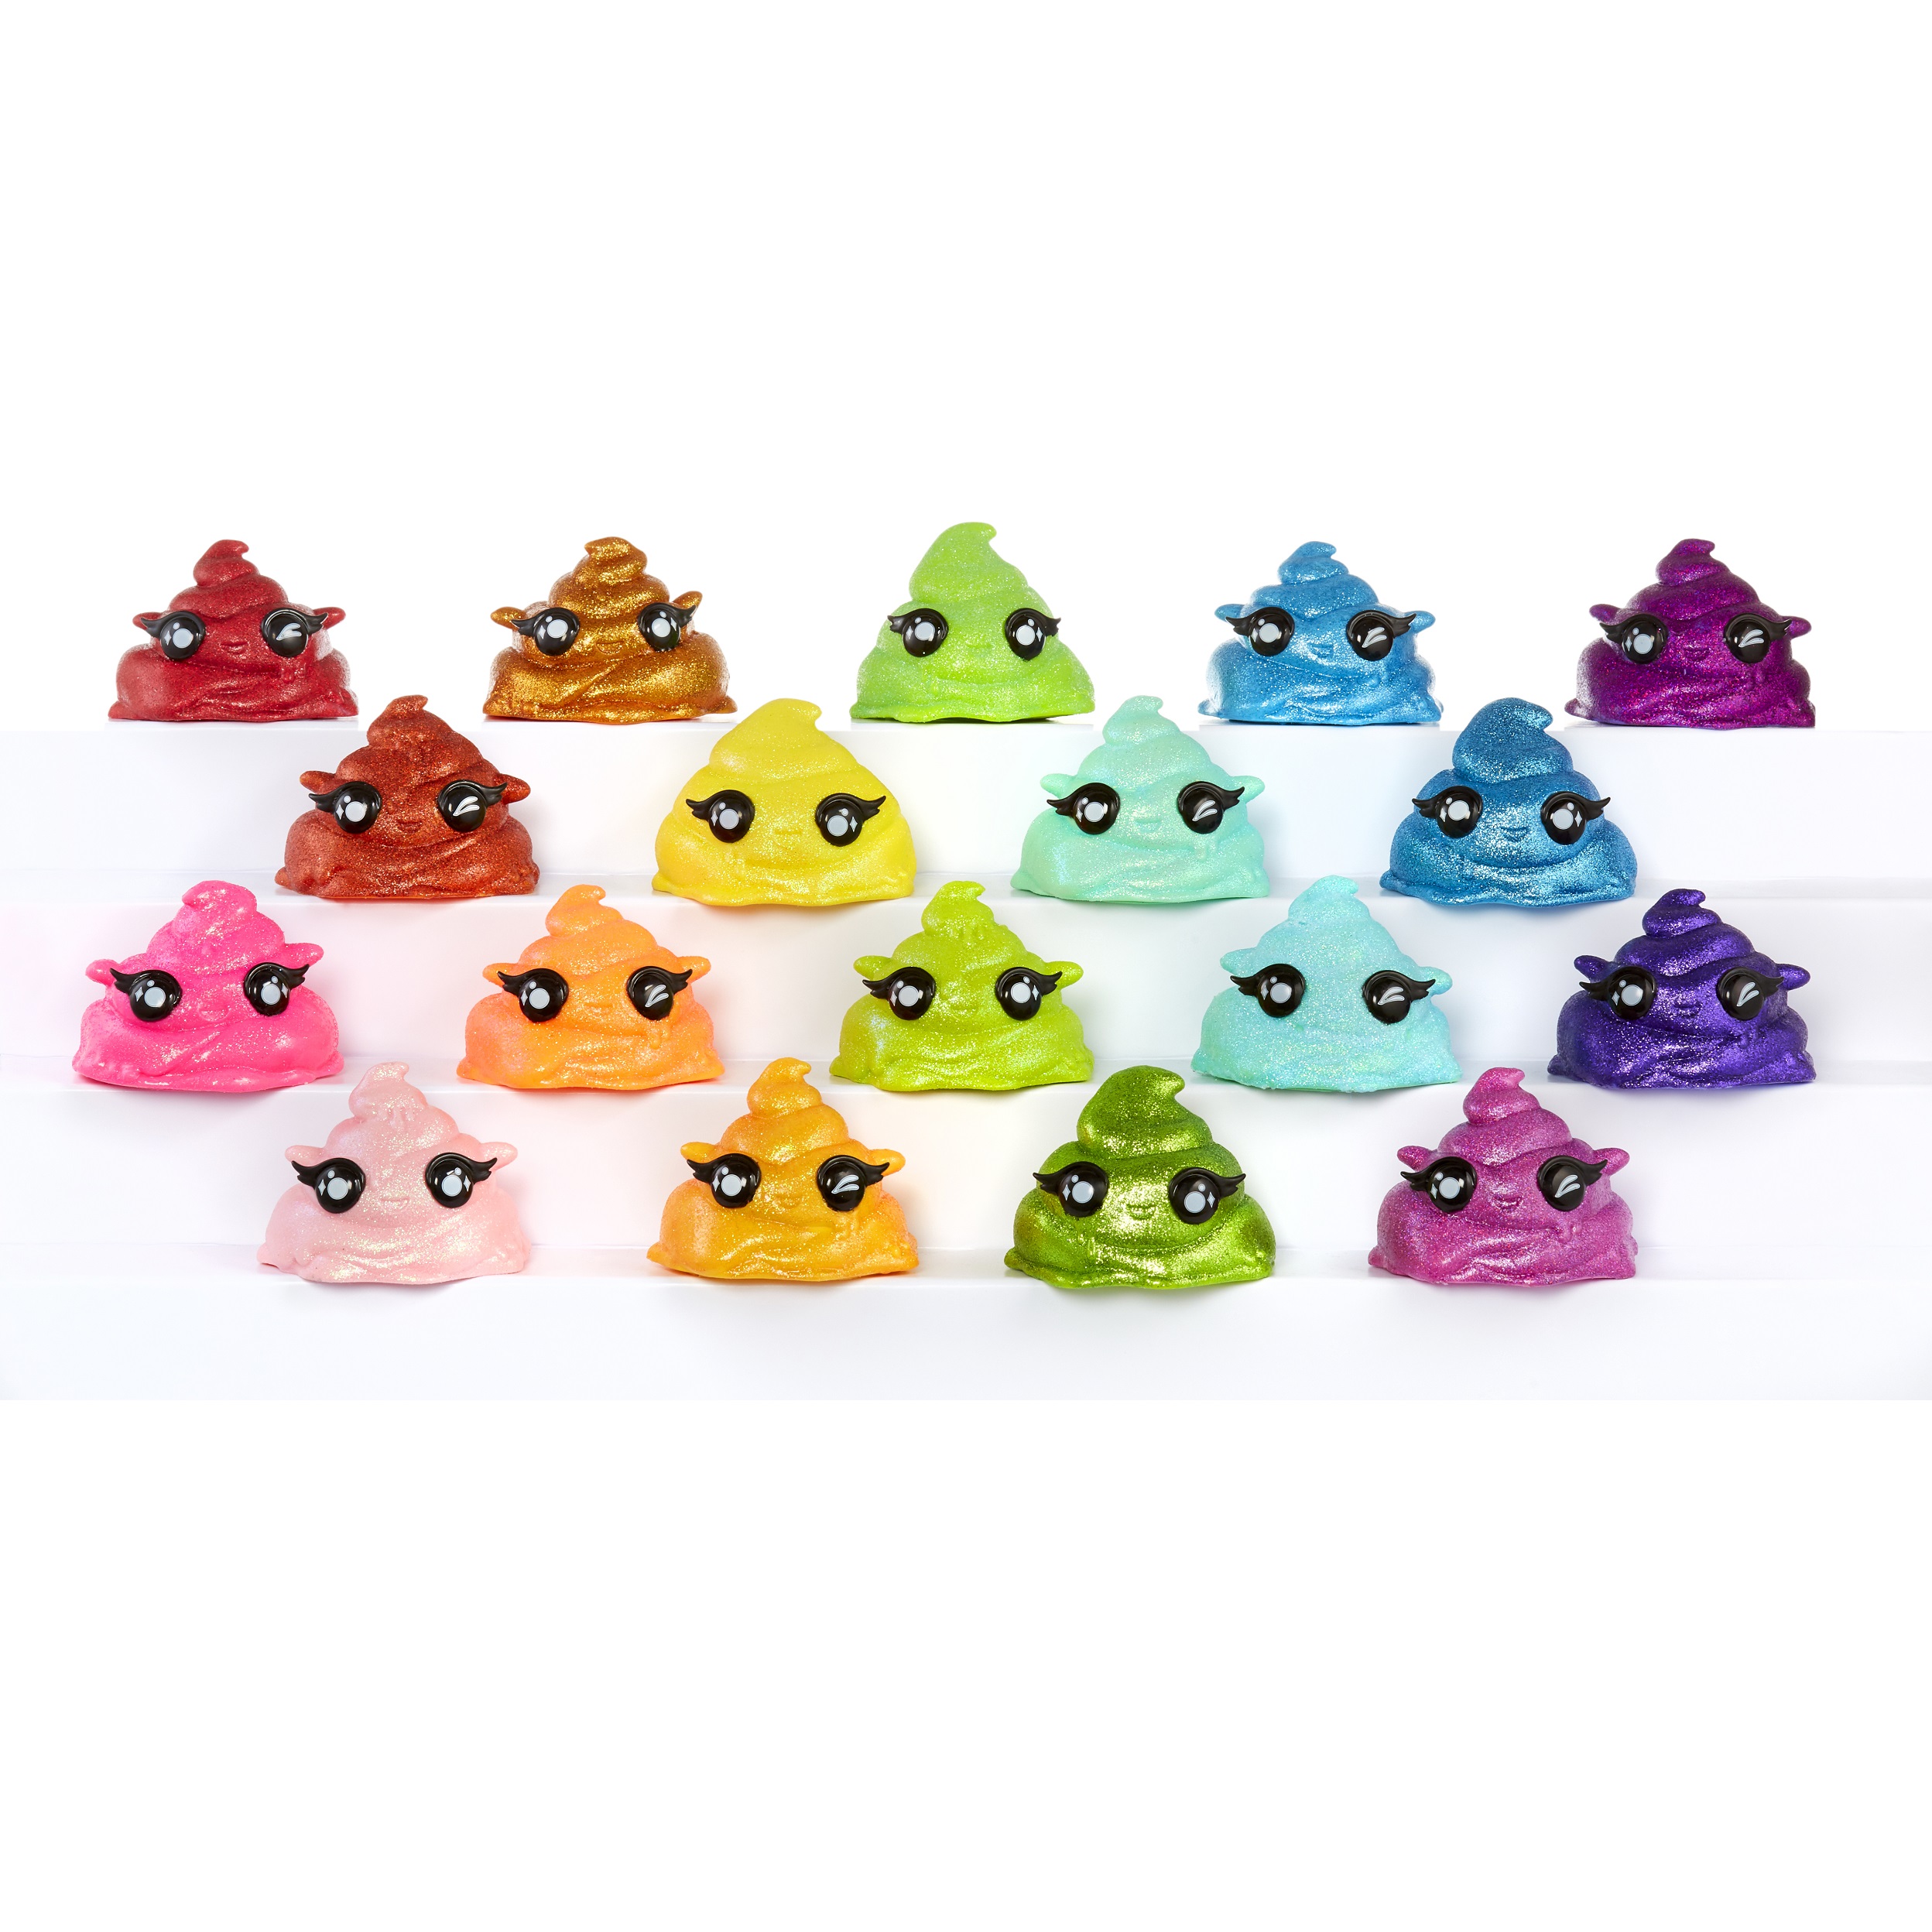 Poopsie Cutie Tooties Surprise Collectible Slime & Mystery Character Wave 2 - image 5 of 6